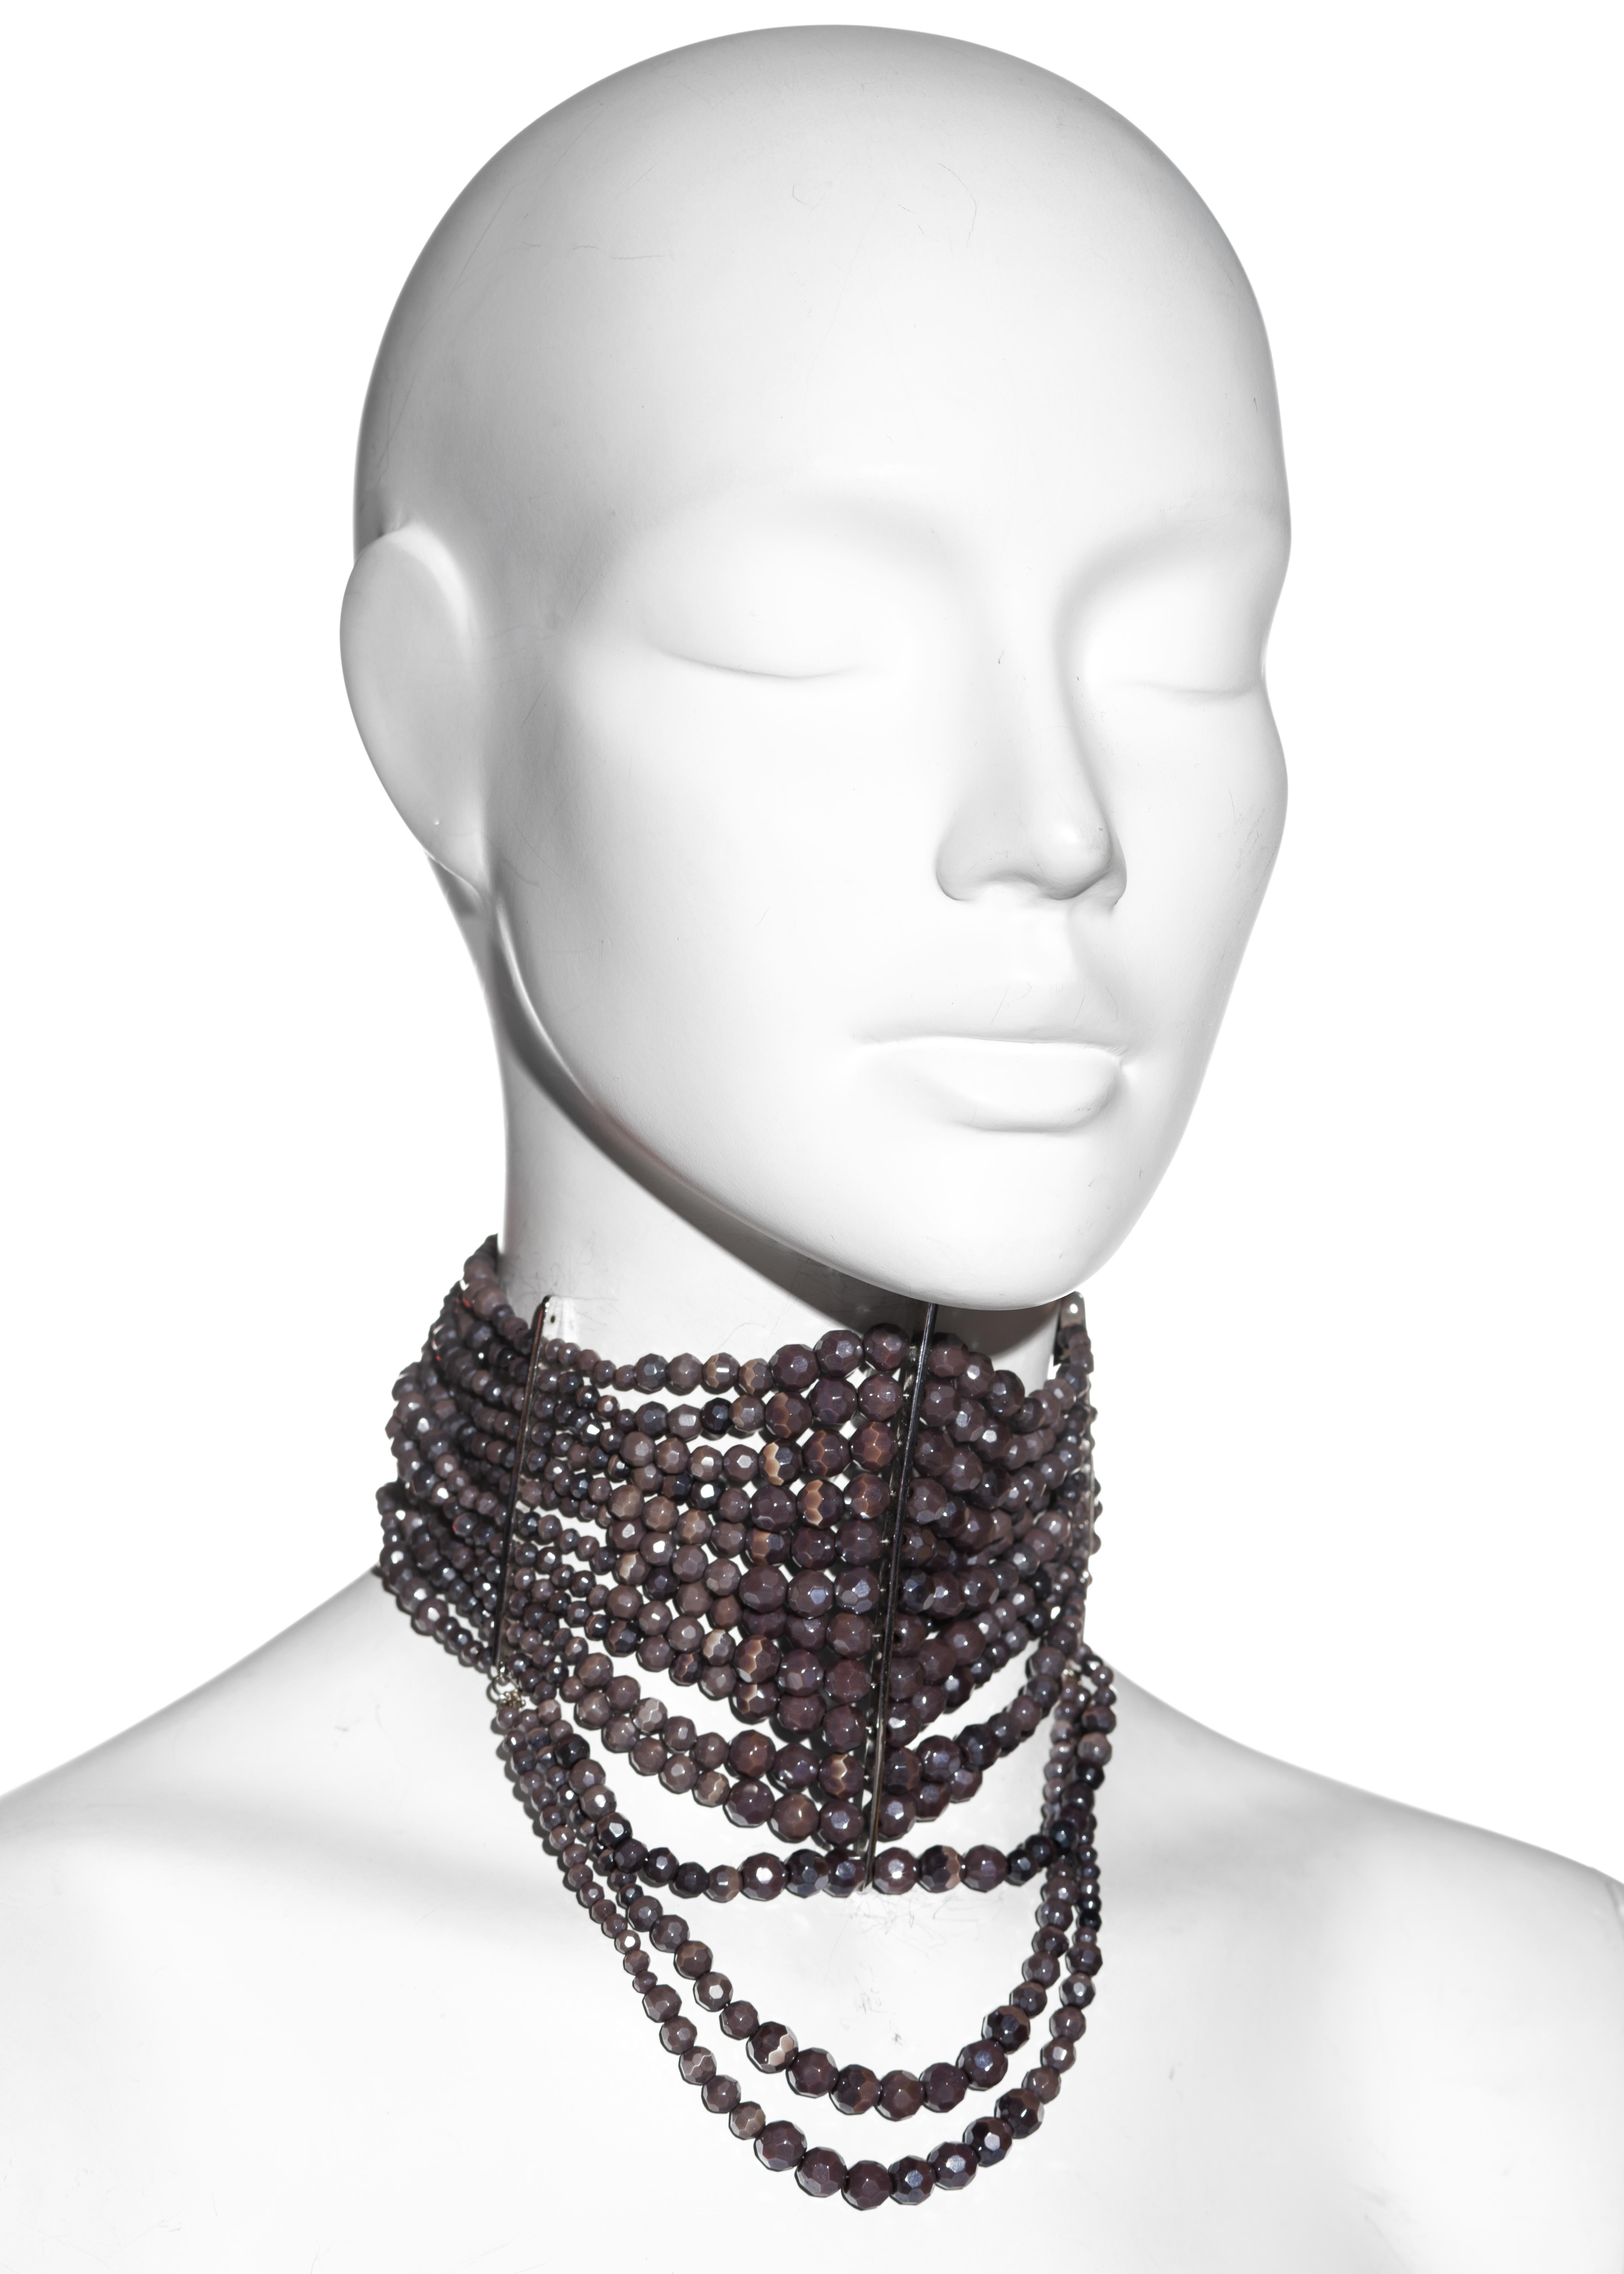 ▪ Christian Dior masai choker necklace
▪ Designed by John Galliano 
▪ 12-strands of purple-coloured faceted beads with 2 fixed looped strands 
▪ Silver metal hardware
▪ 2 chain closures at back for additional width 
▪ Spring-Summer 1998
